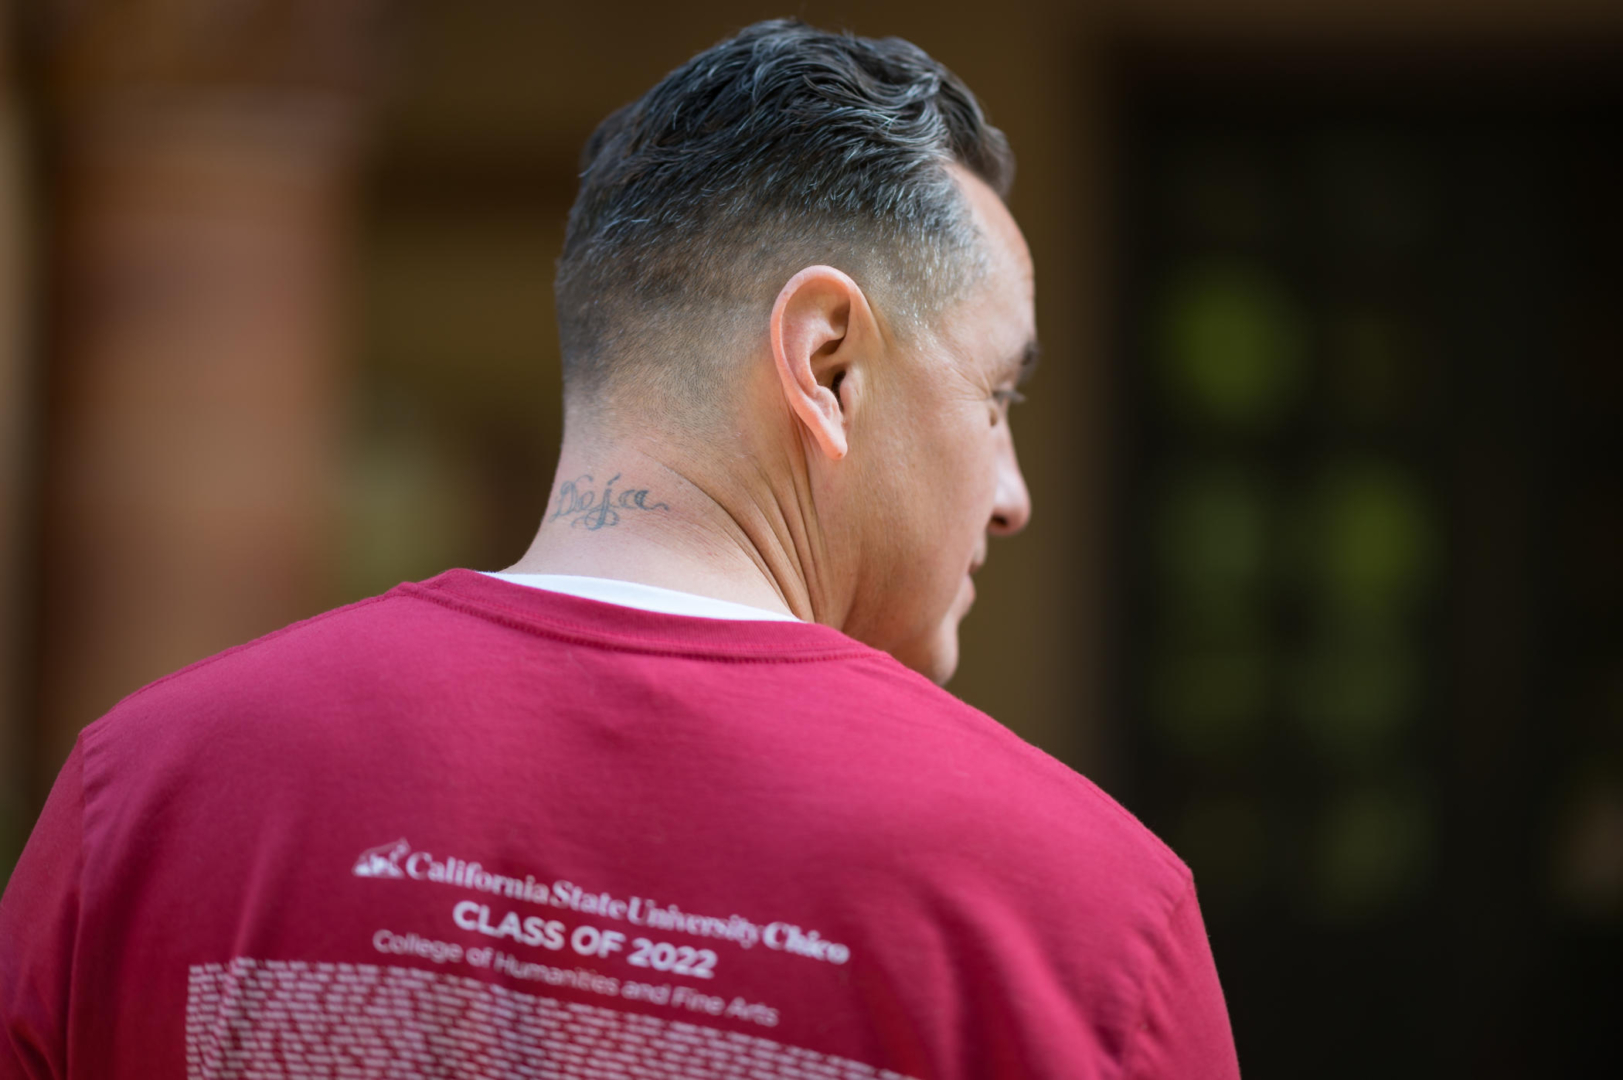 The name "Deja" is seen tattooed on the back of Benny Gutierrez's neck.